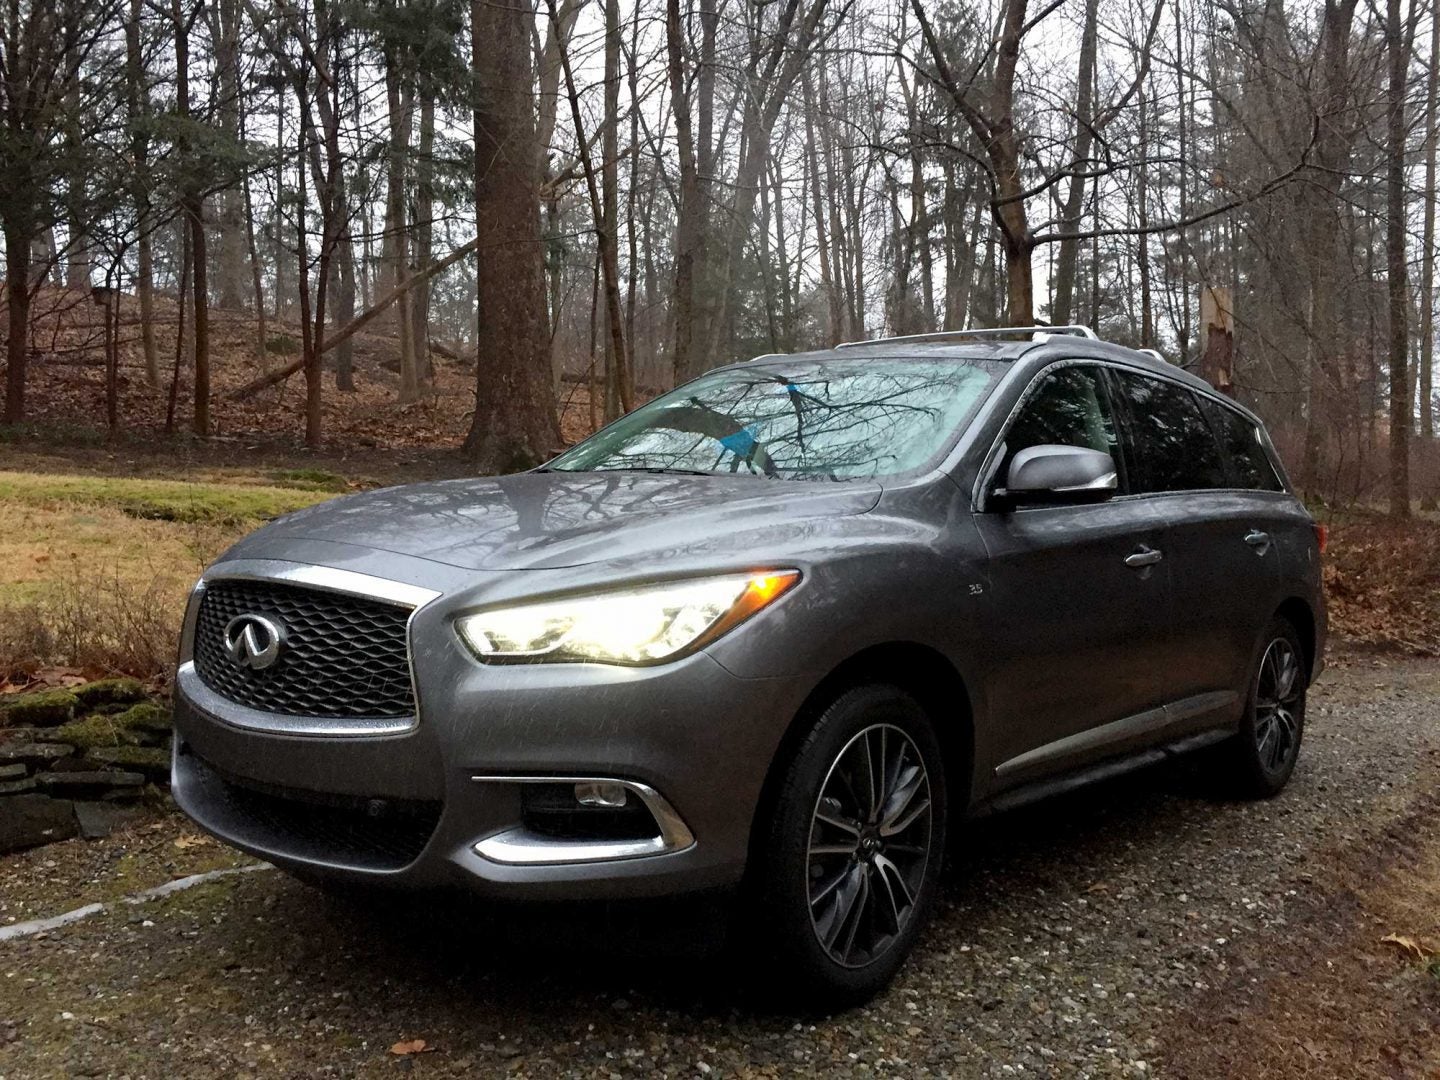 The 2017 Infiniti QX60 Is the All-Around Family SUV You’ve Been Looking For